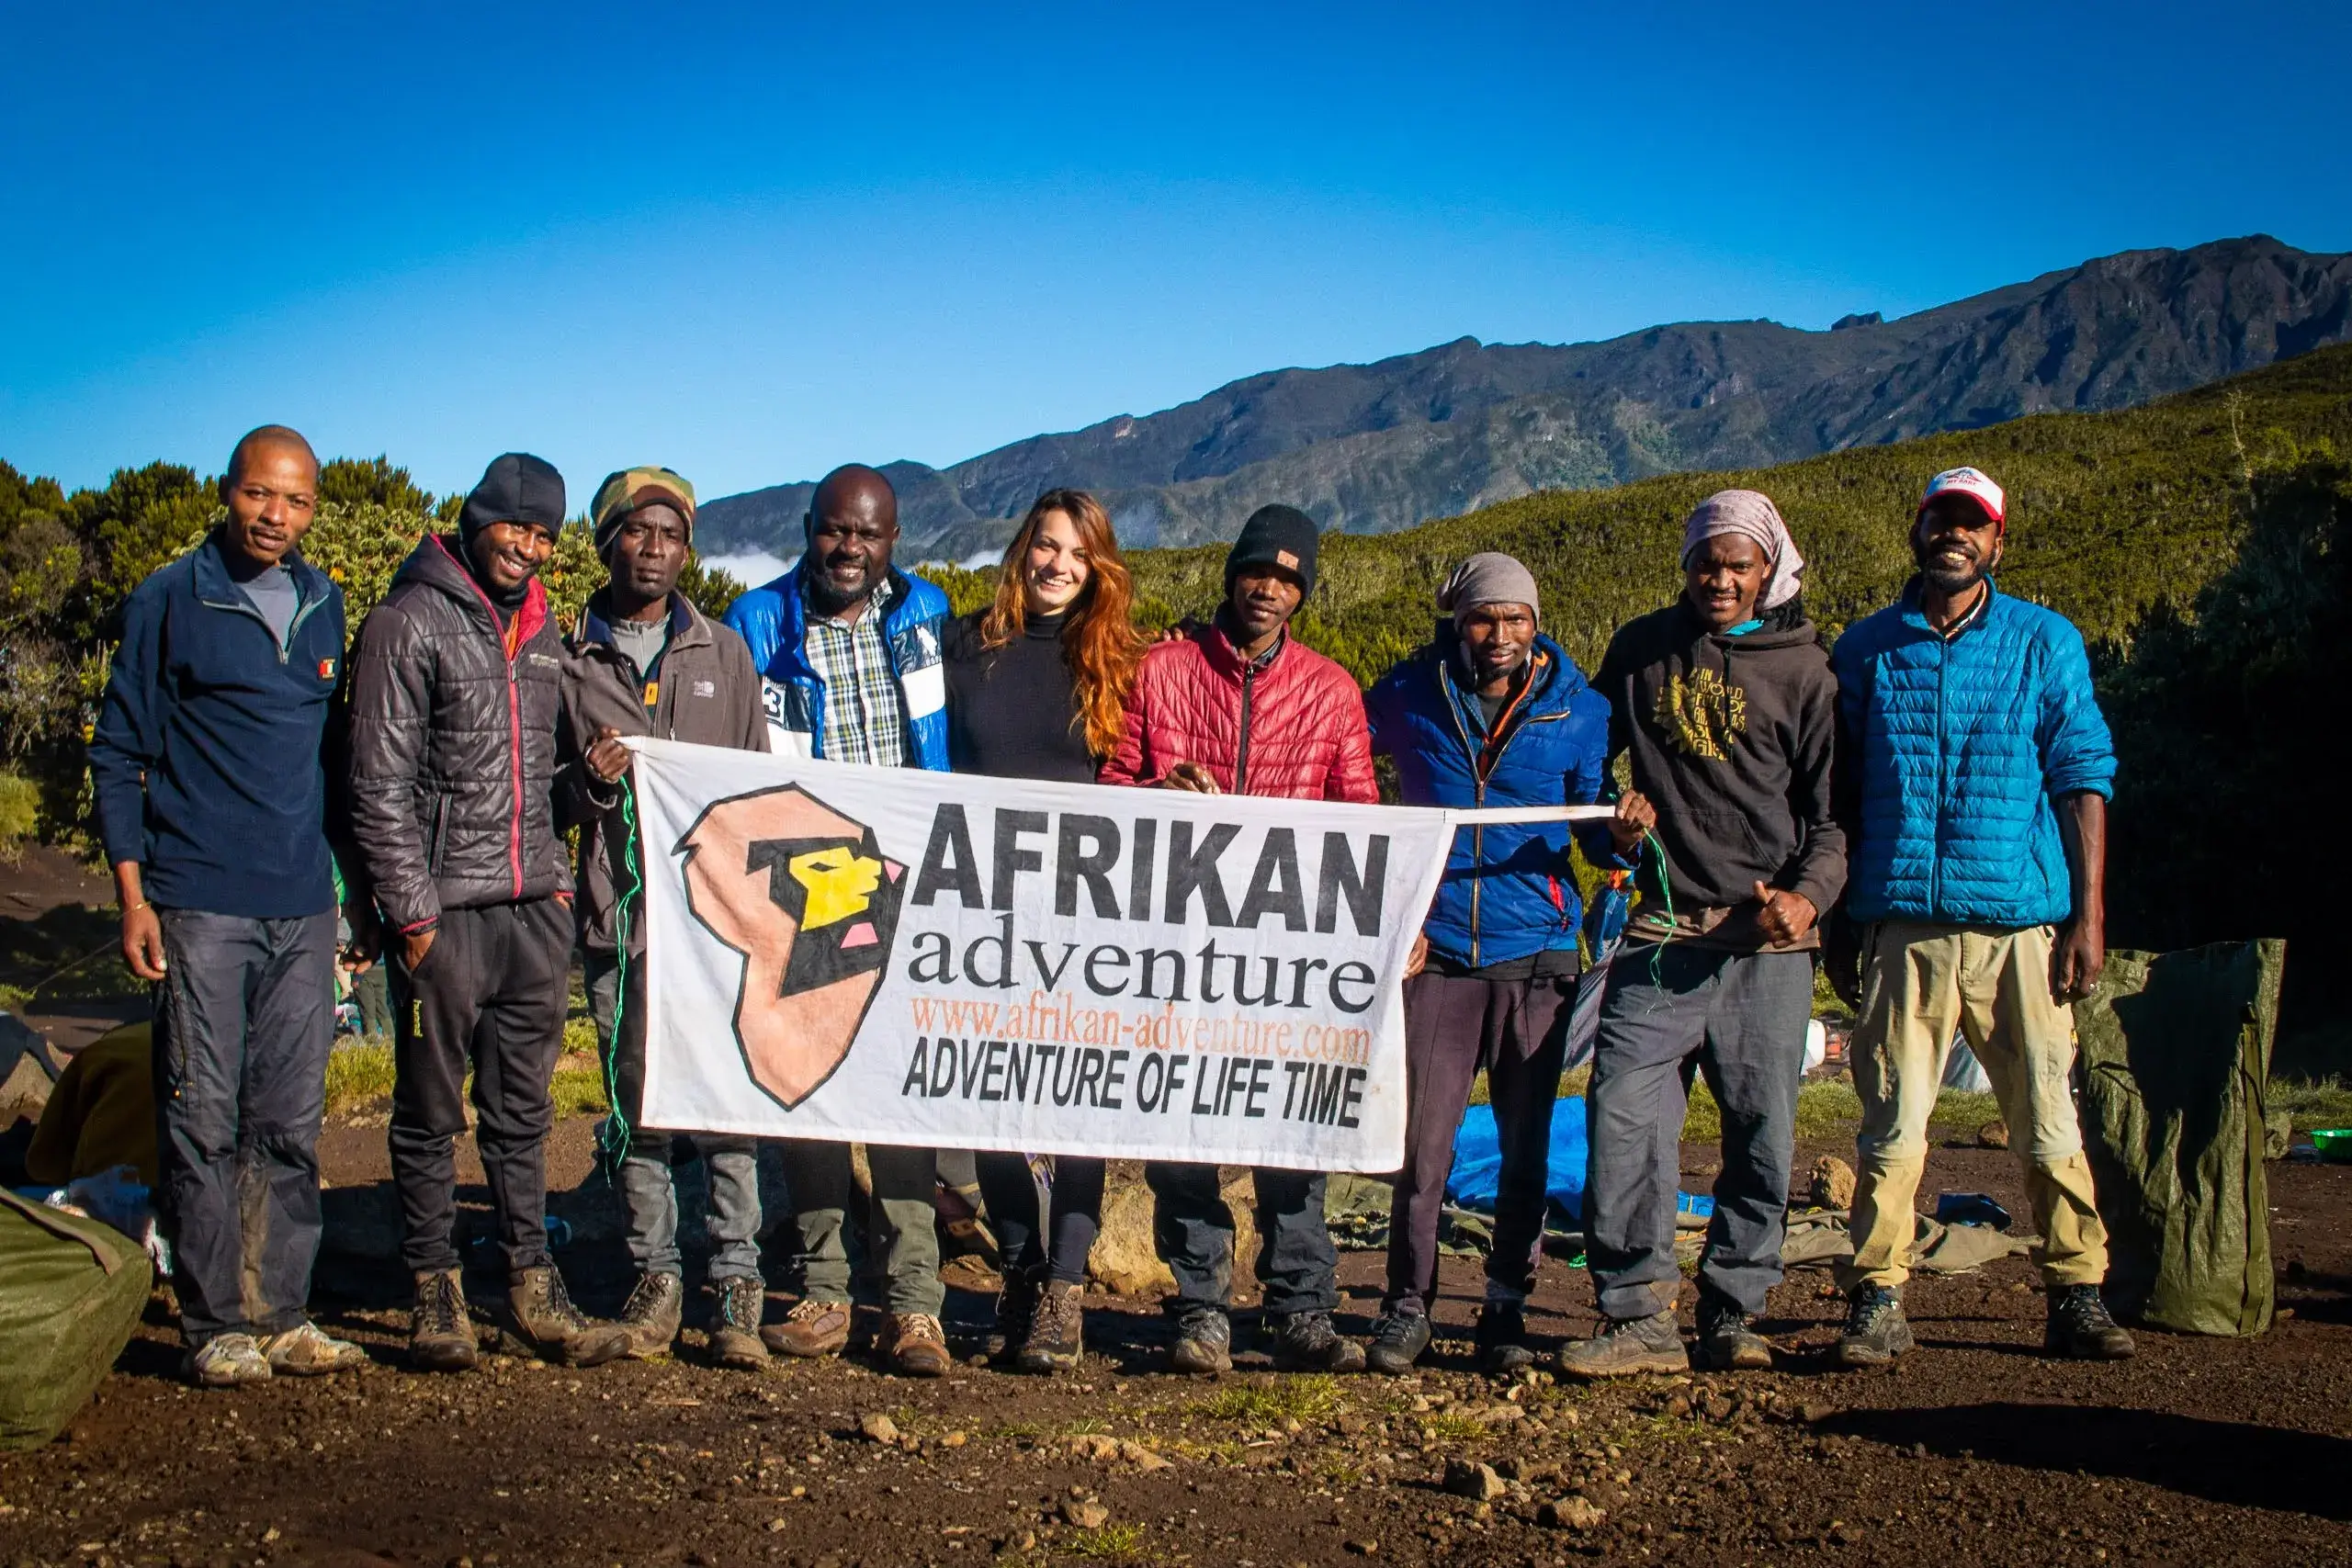 Our travelers, who are a group of friends taking a picture after completing Kilimanjaro trek